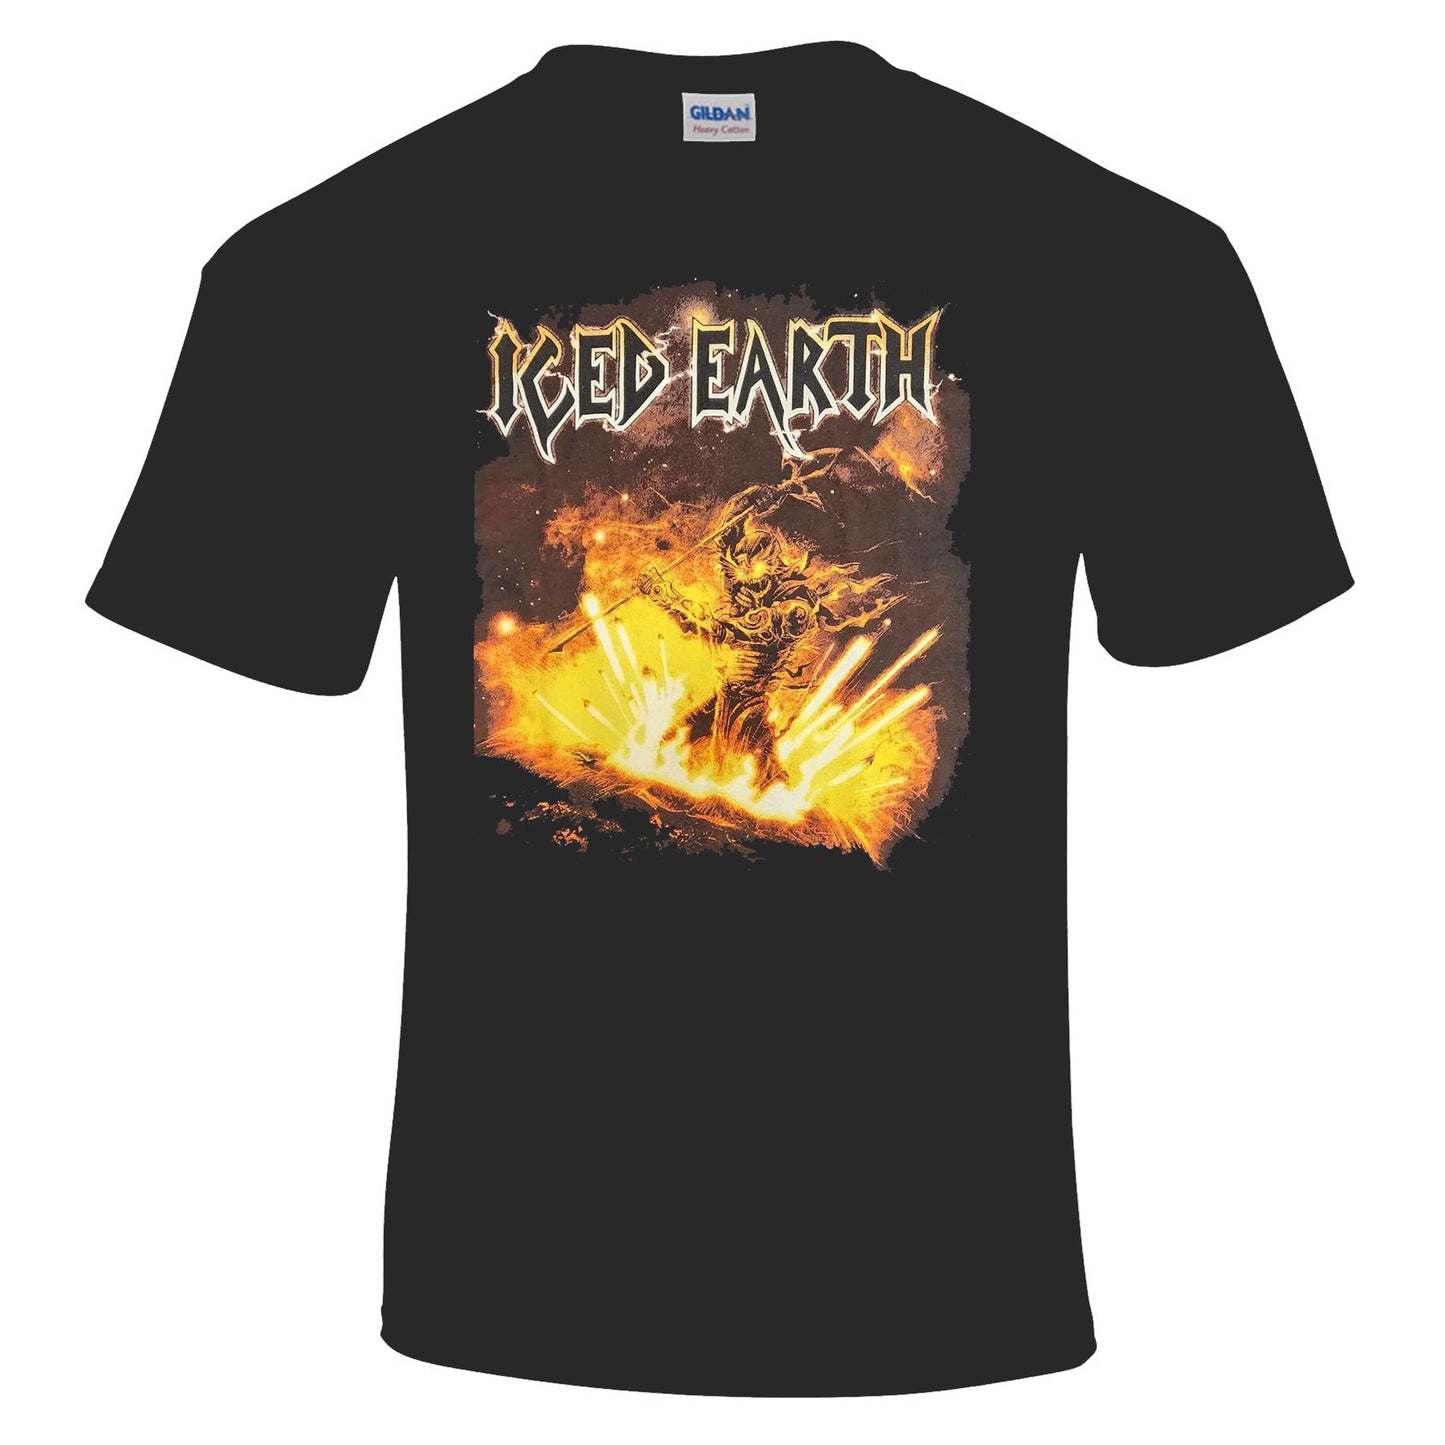 ICED EARTH The Crucible of Man T-Shirt